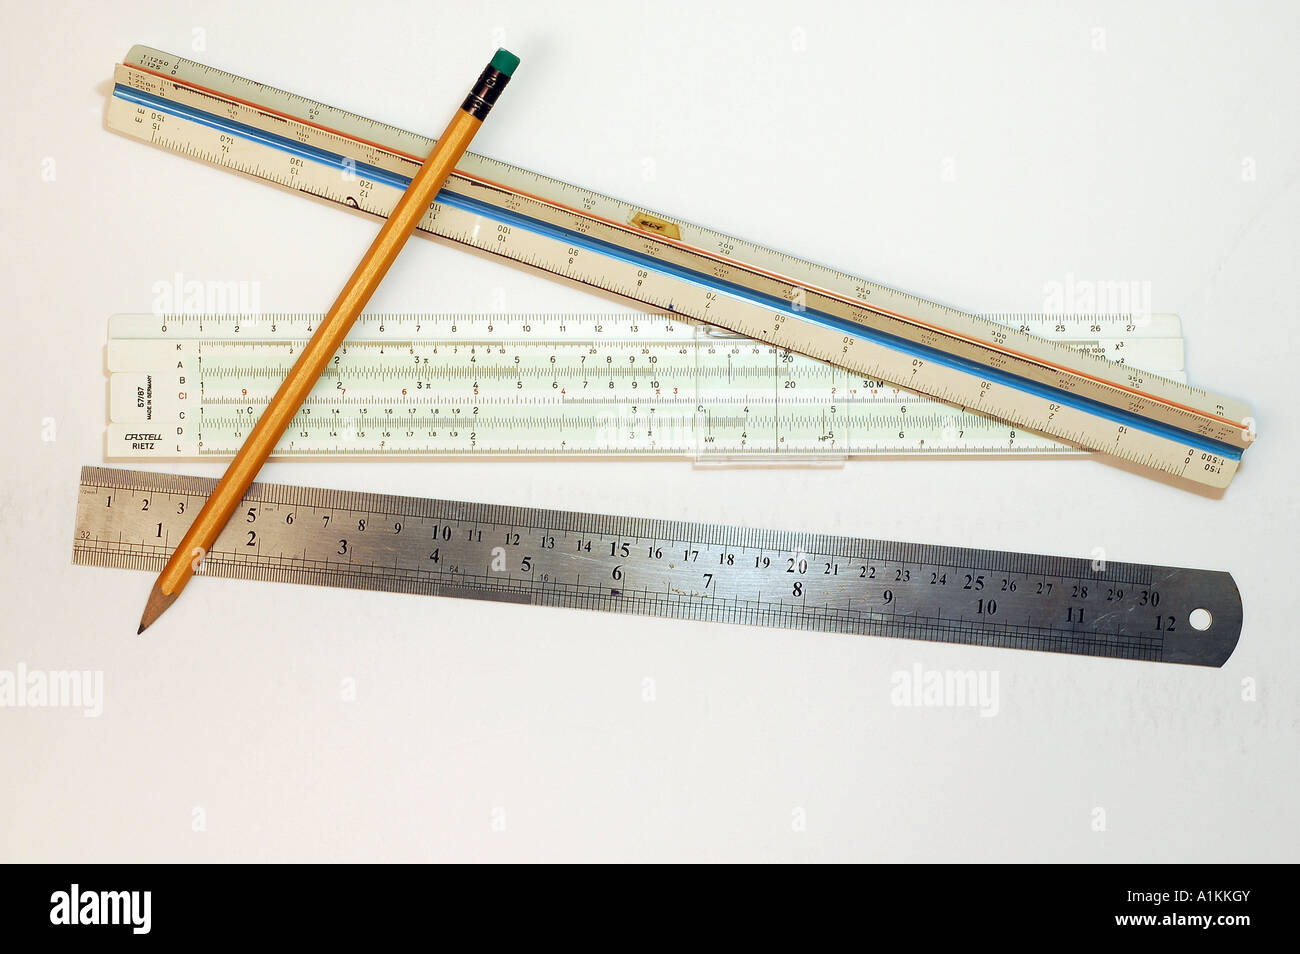 3 types of rulers regular slid and scale with a pencil used for planning and design work Stock Photo